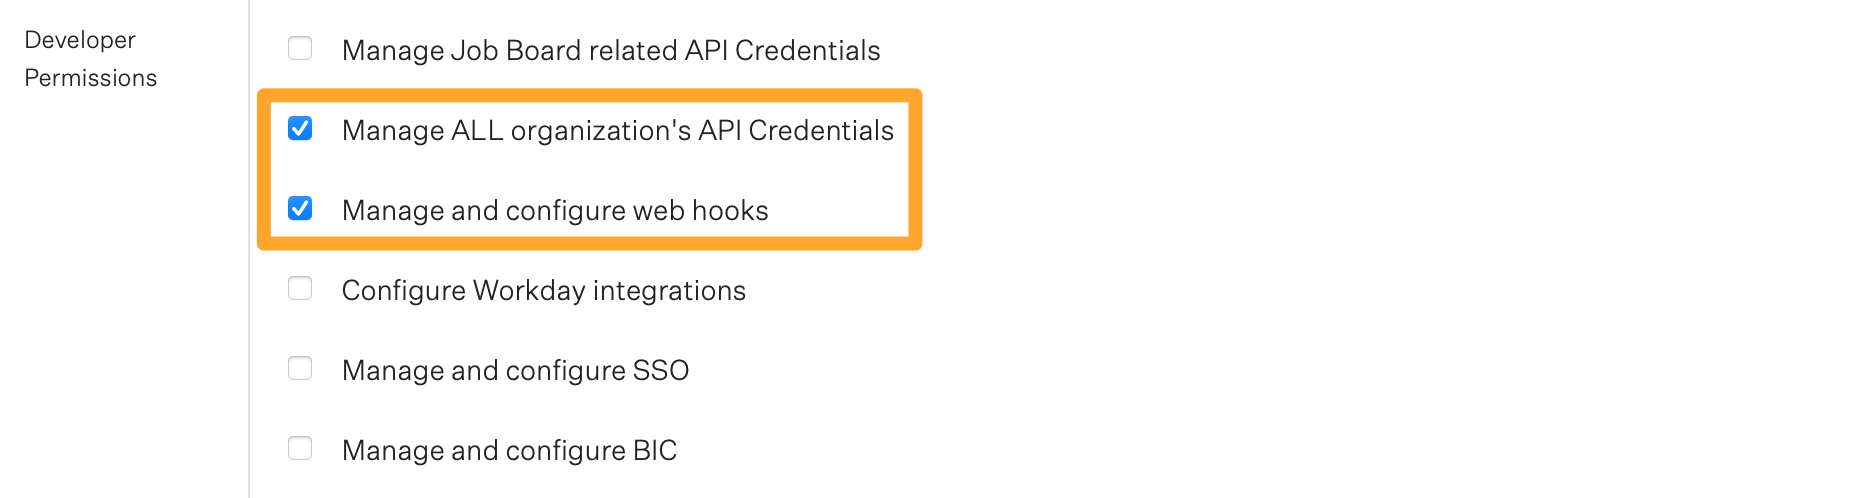 Screenshot of Can manage ALL organization's API credentials and can manage and create web hooks permissions